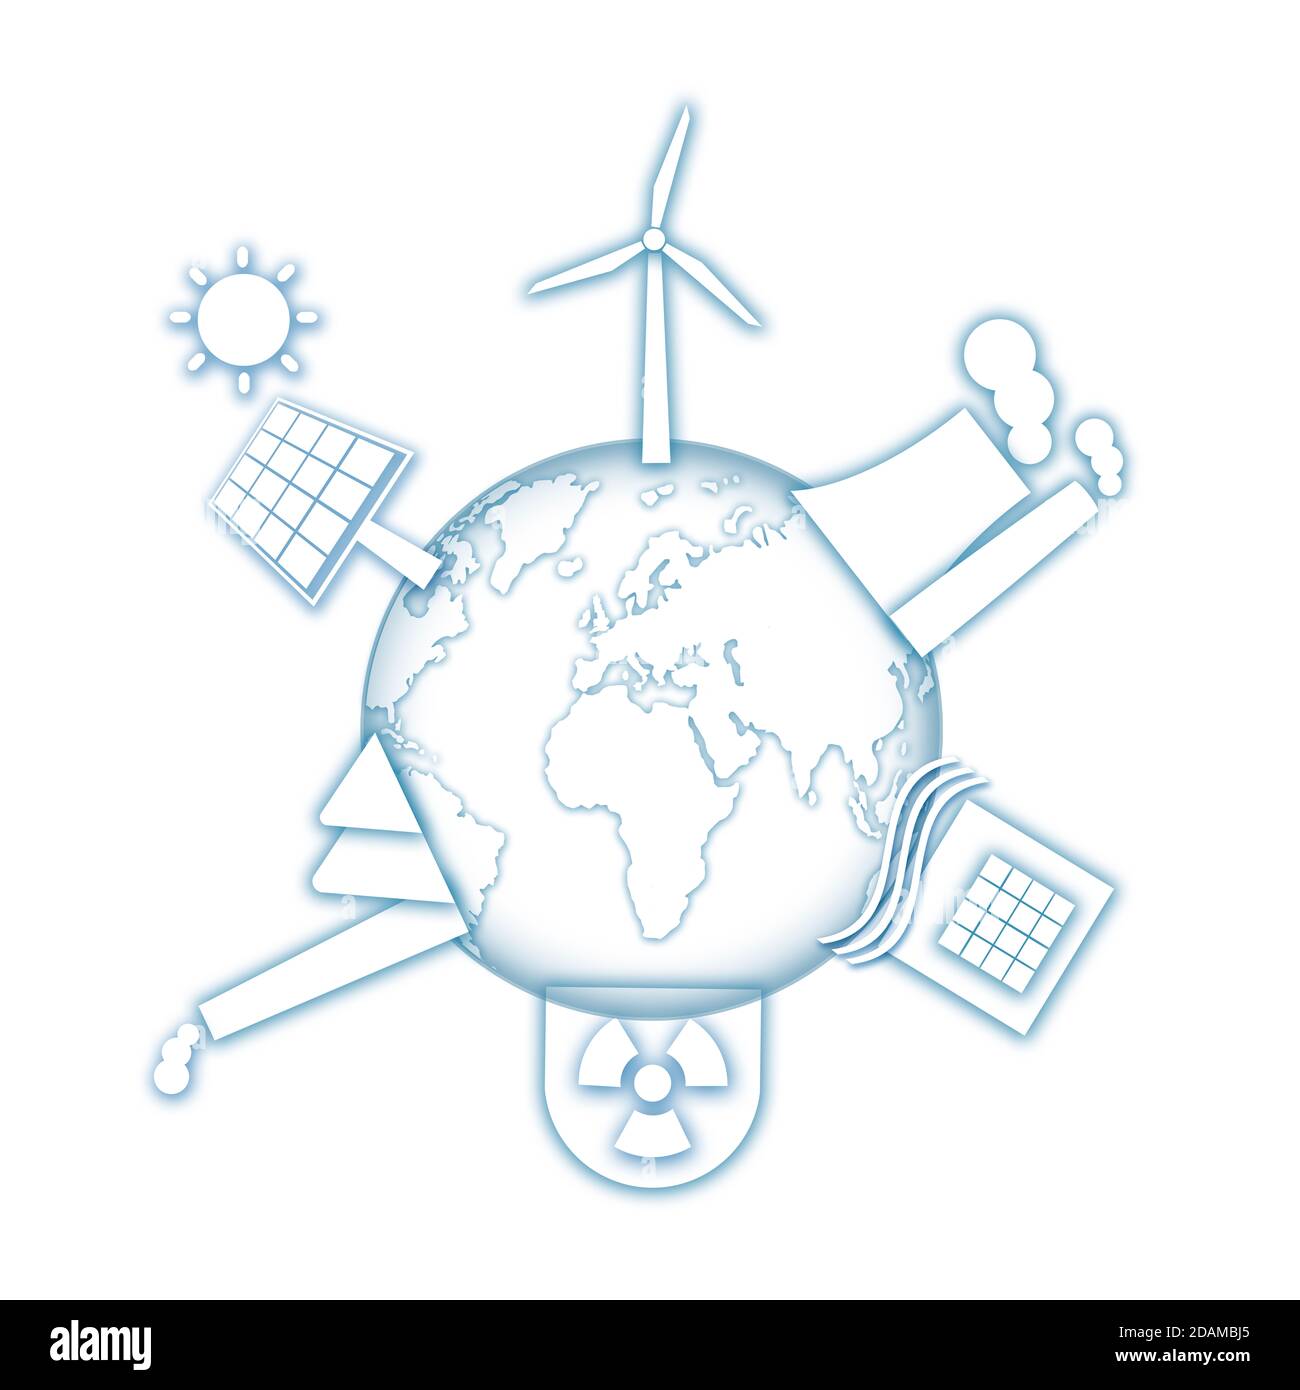 Earth surrounded by all types of power station, illustration. Stock Photo